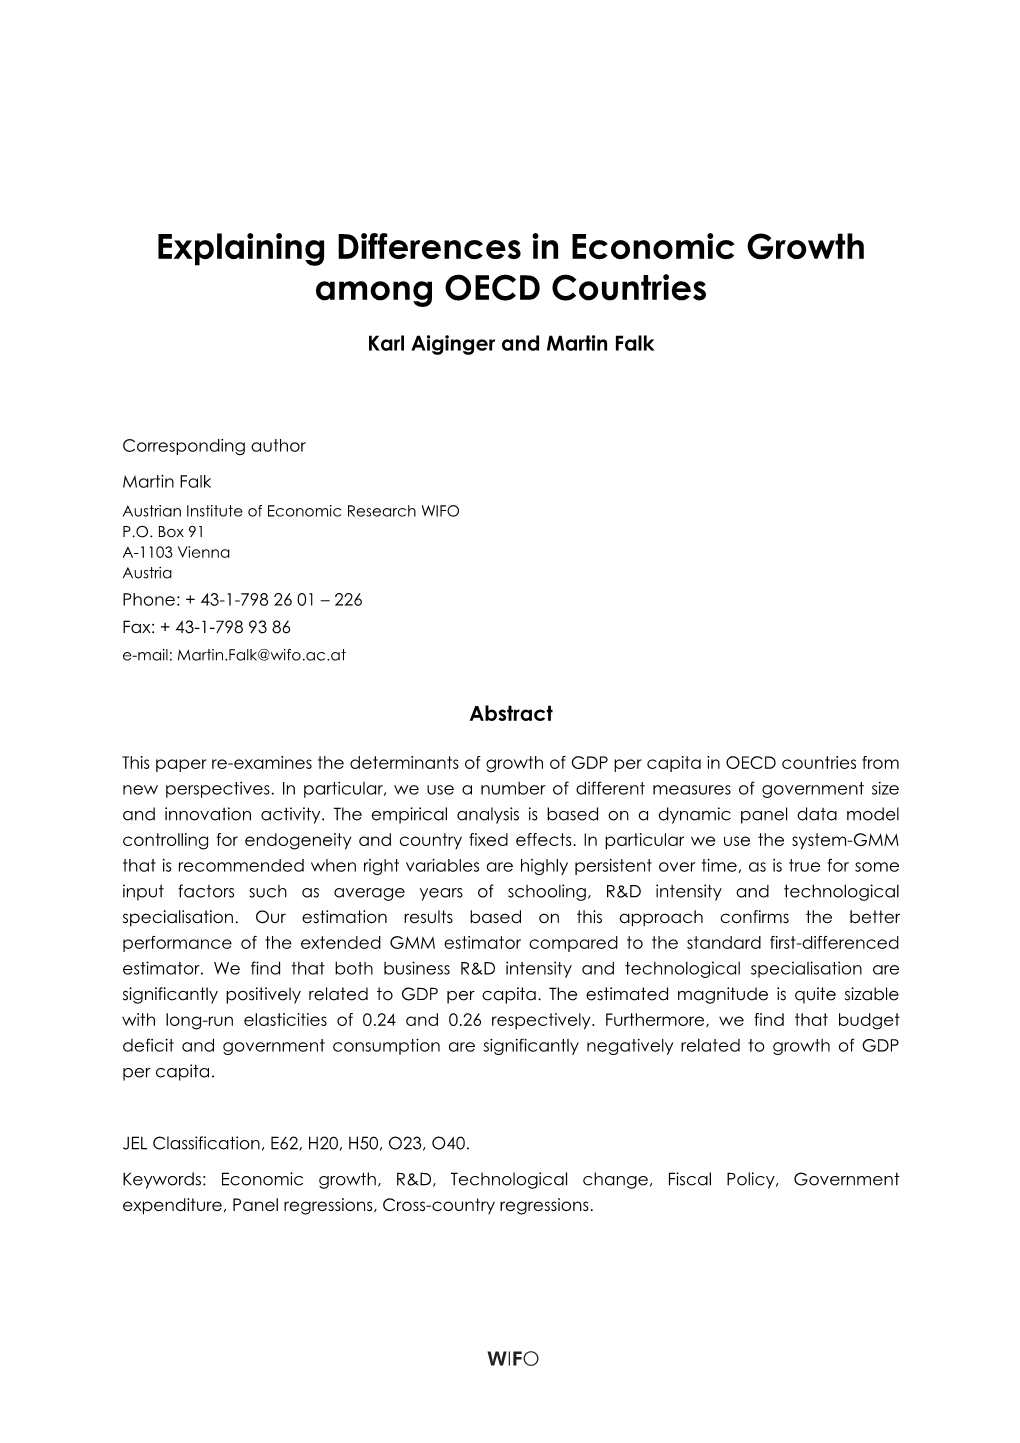 Explaining Differences in Economic Growth Among OECD Countries